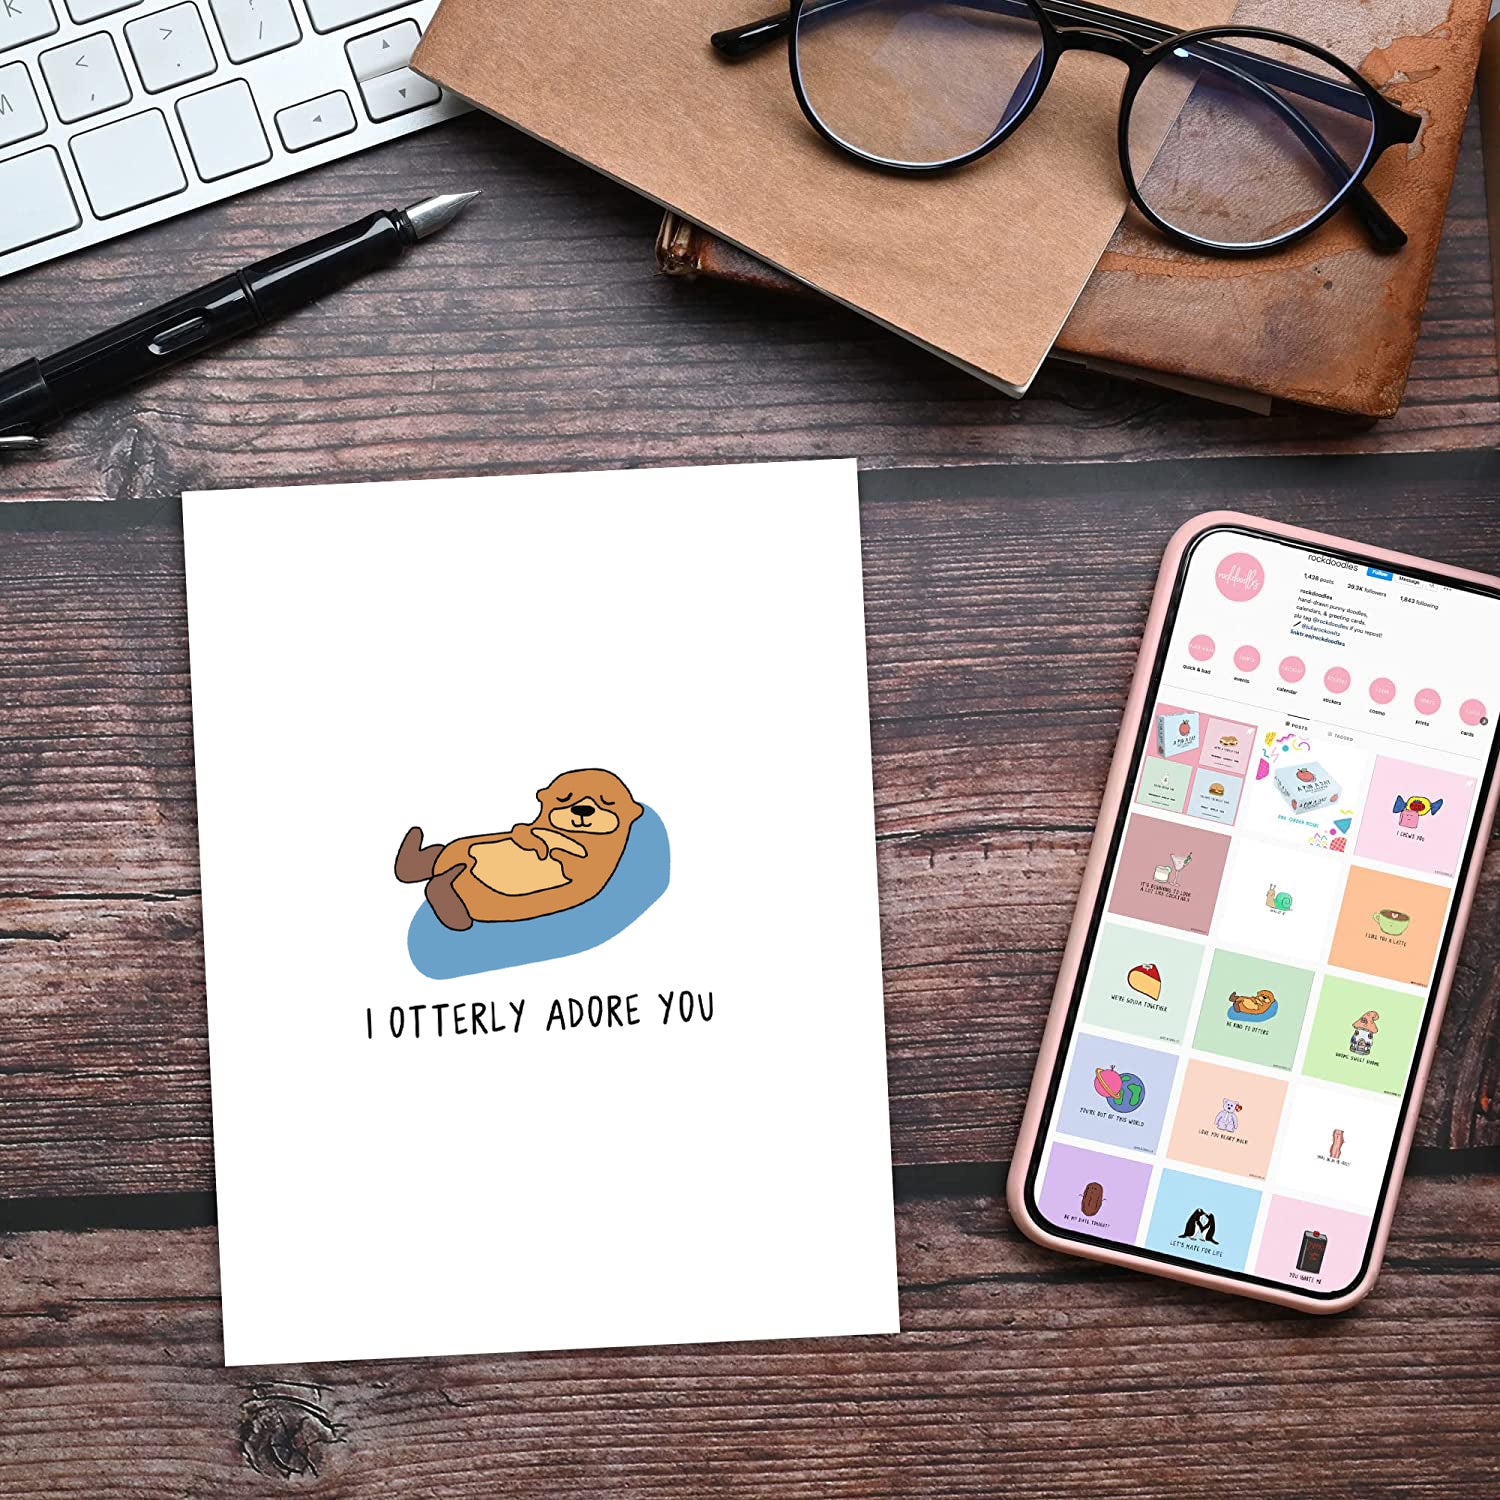 An I Otterly Adore You Card featuring a charming sloth sitting on a desk, perfect for expressing your affection. Brand: rockdoodles